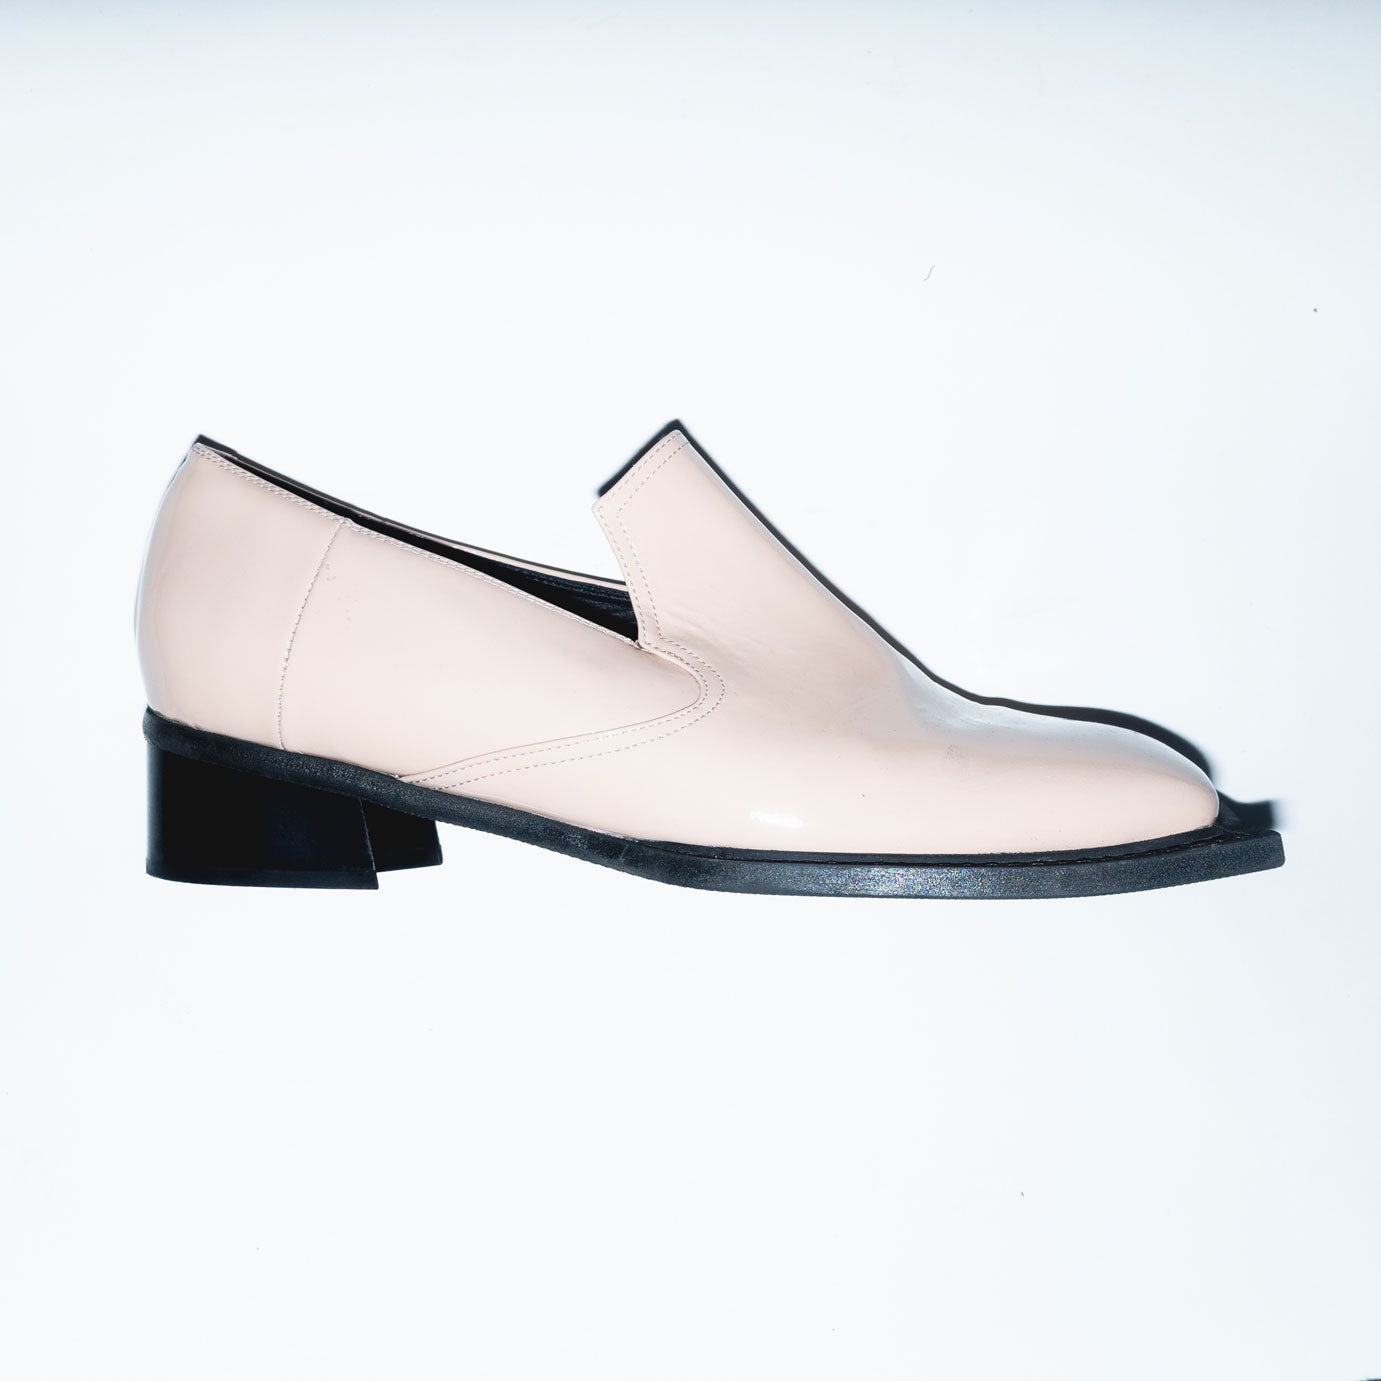 Archive Howled Loafers in Light Pink Patent Leather